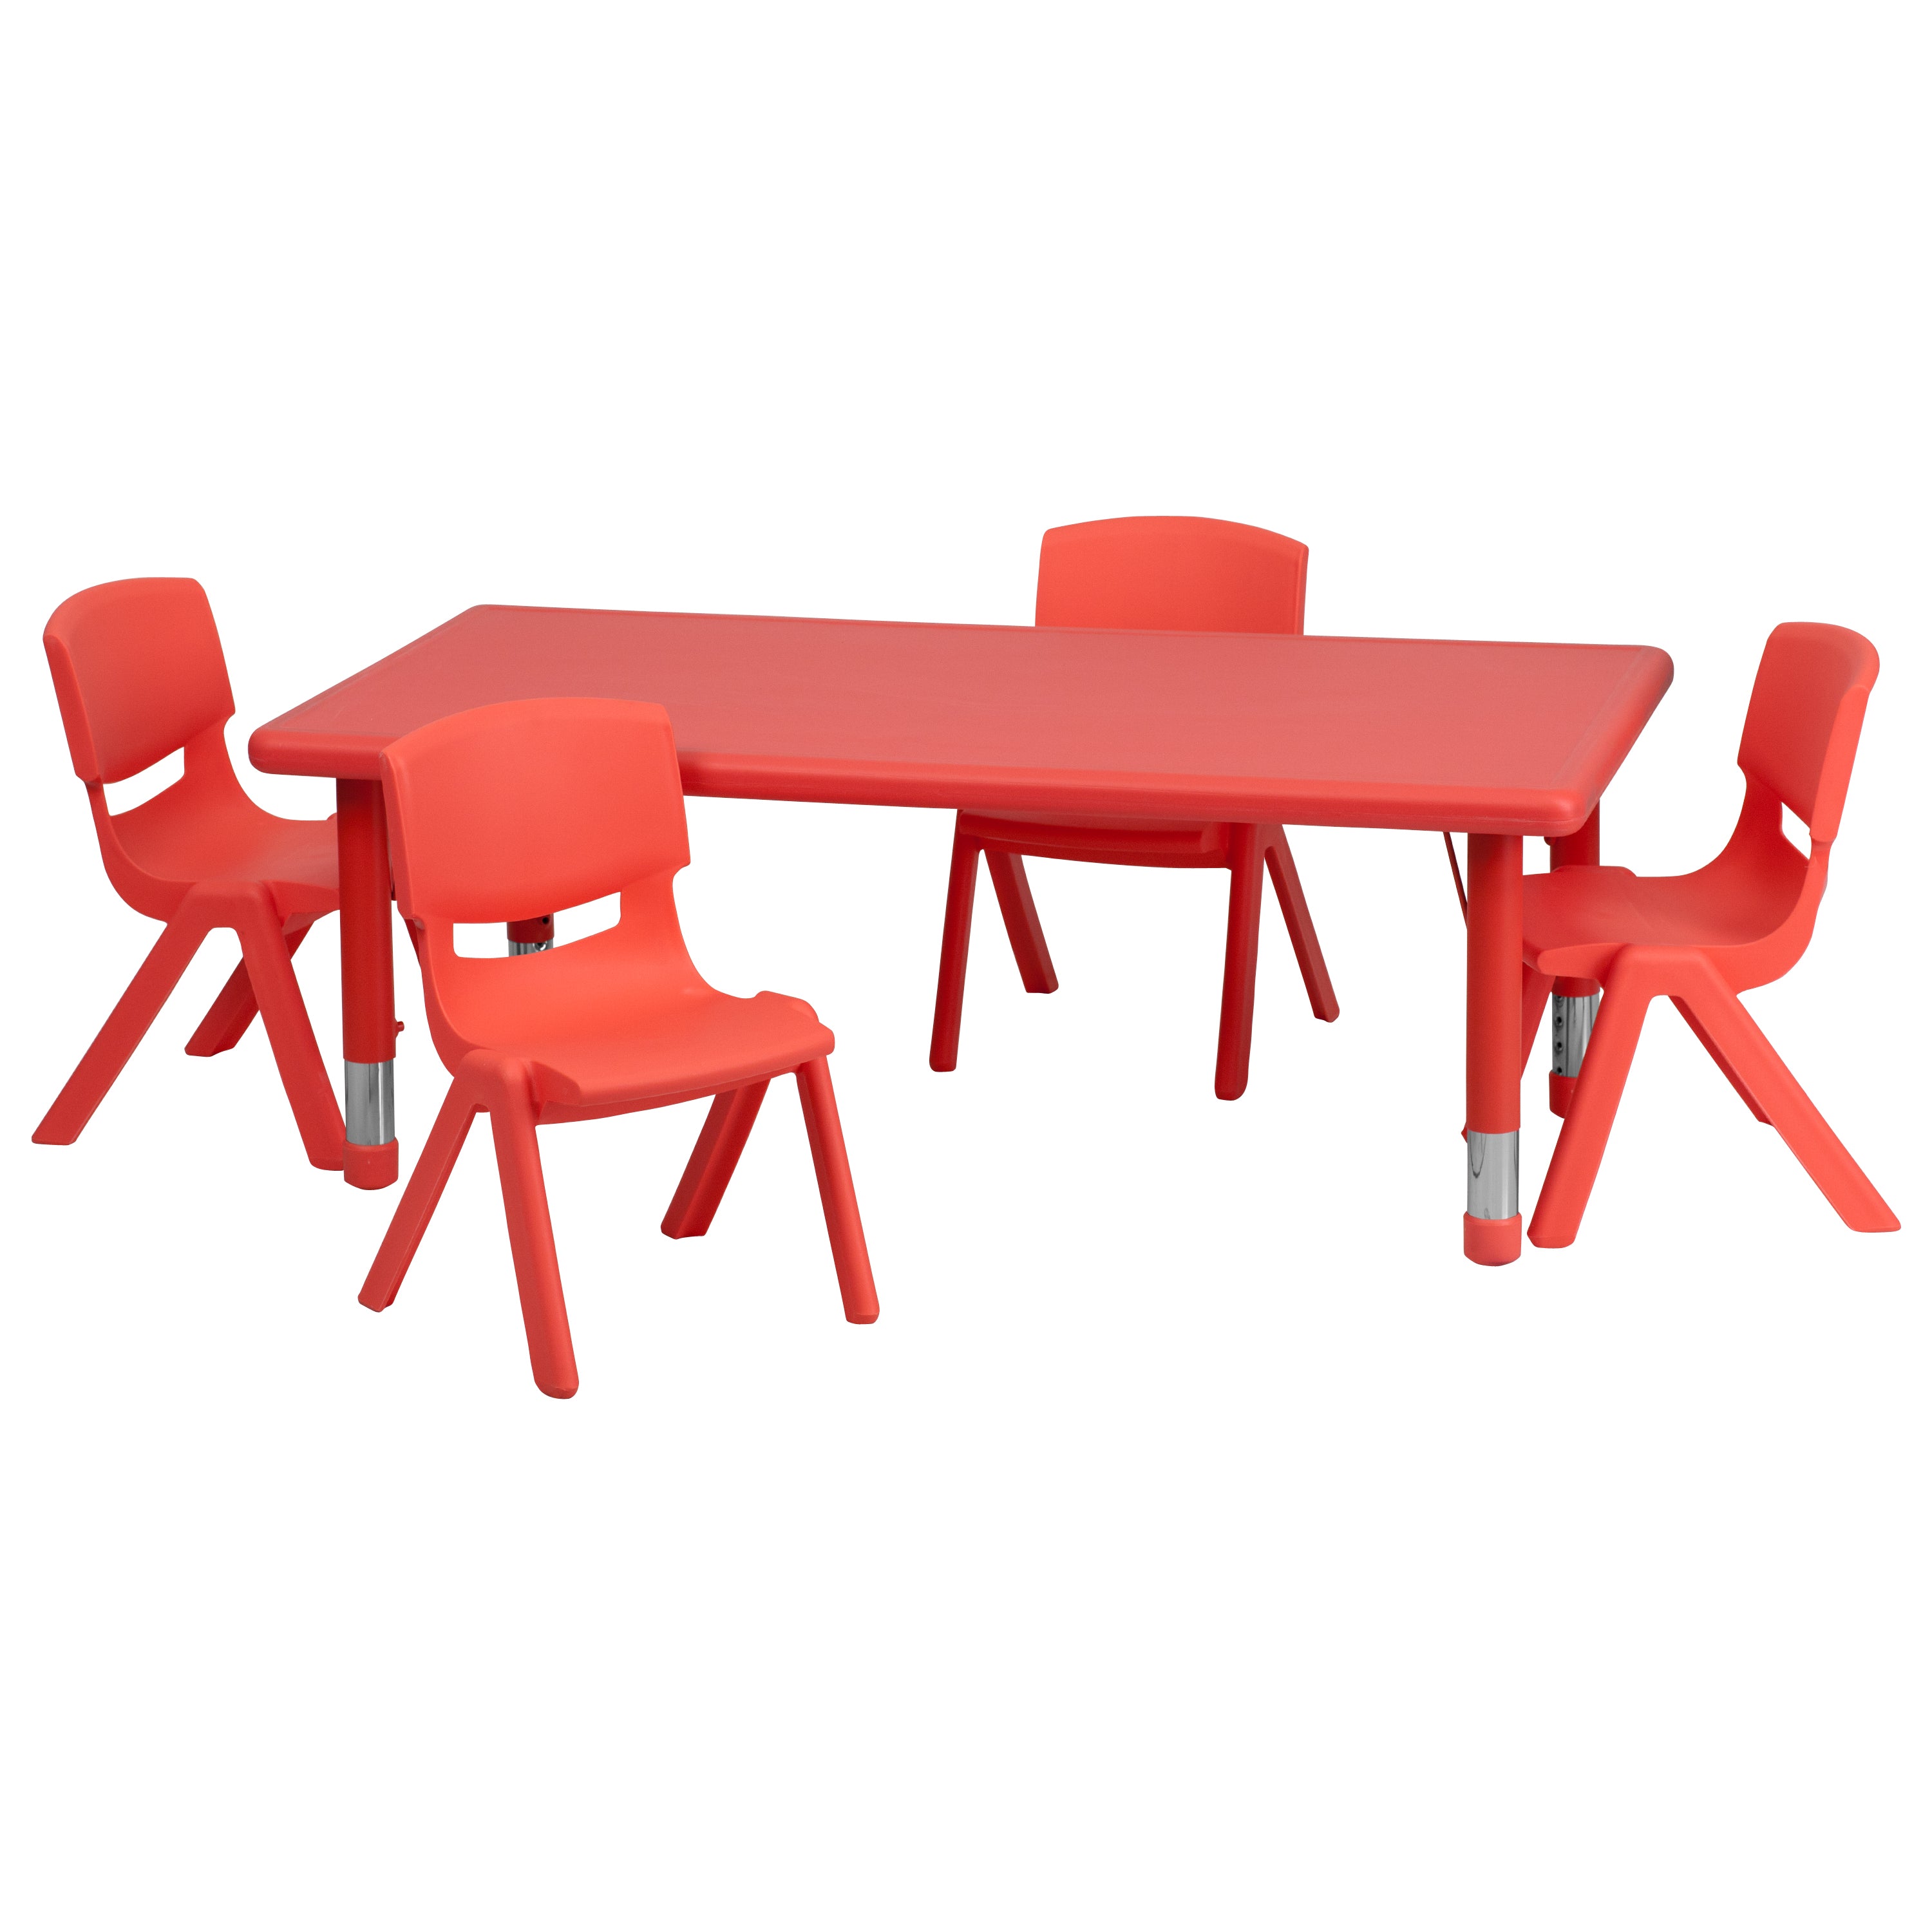 24"W x 48"L Rectangular Plastic Height Adjustable Activity Table Set with 4 Chairs-Rectangular Activity Table Set-Flash Furniture-Wall2Wall Furnishings